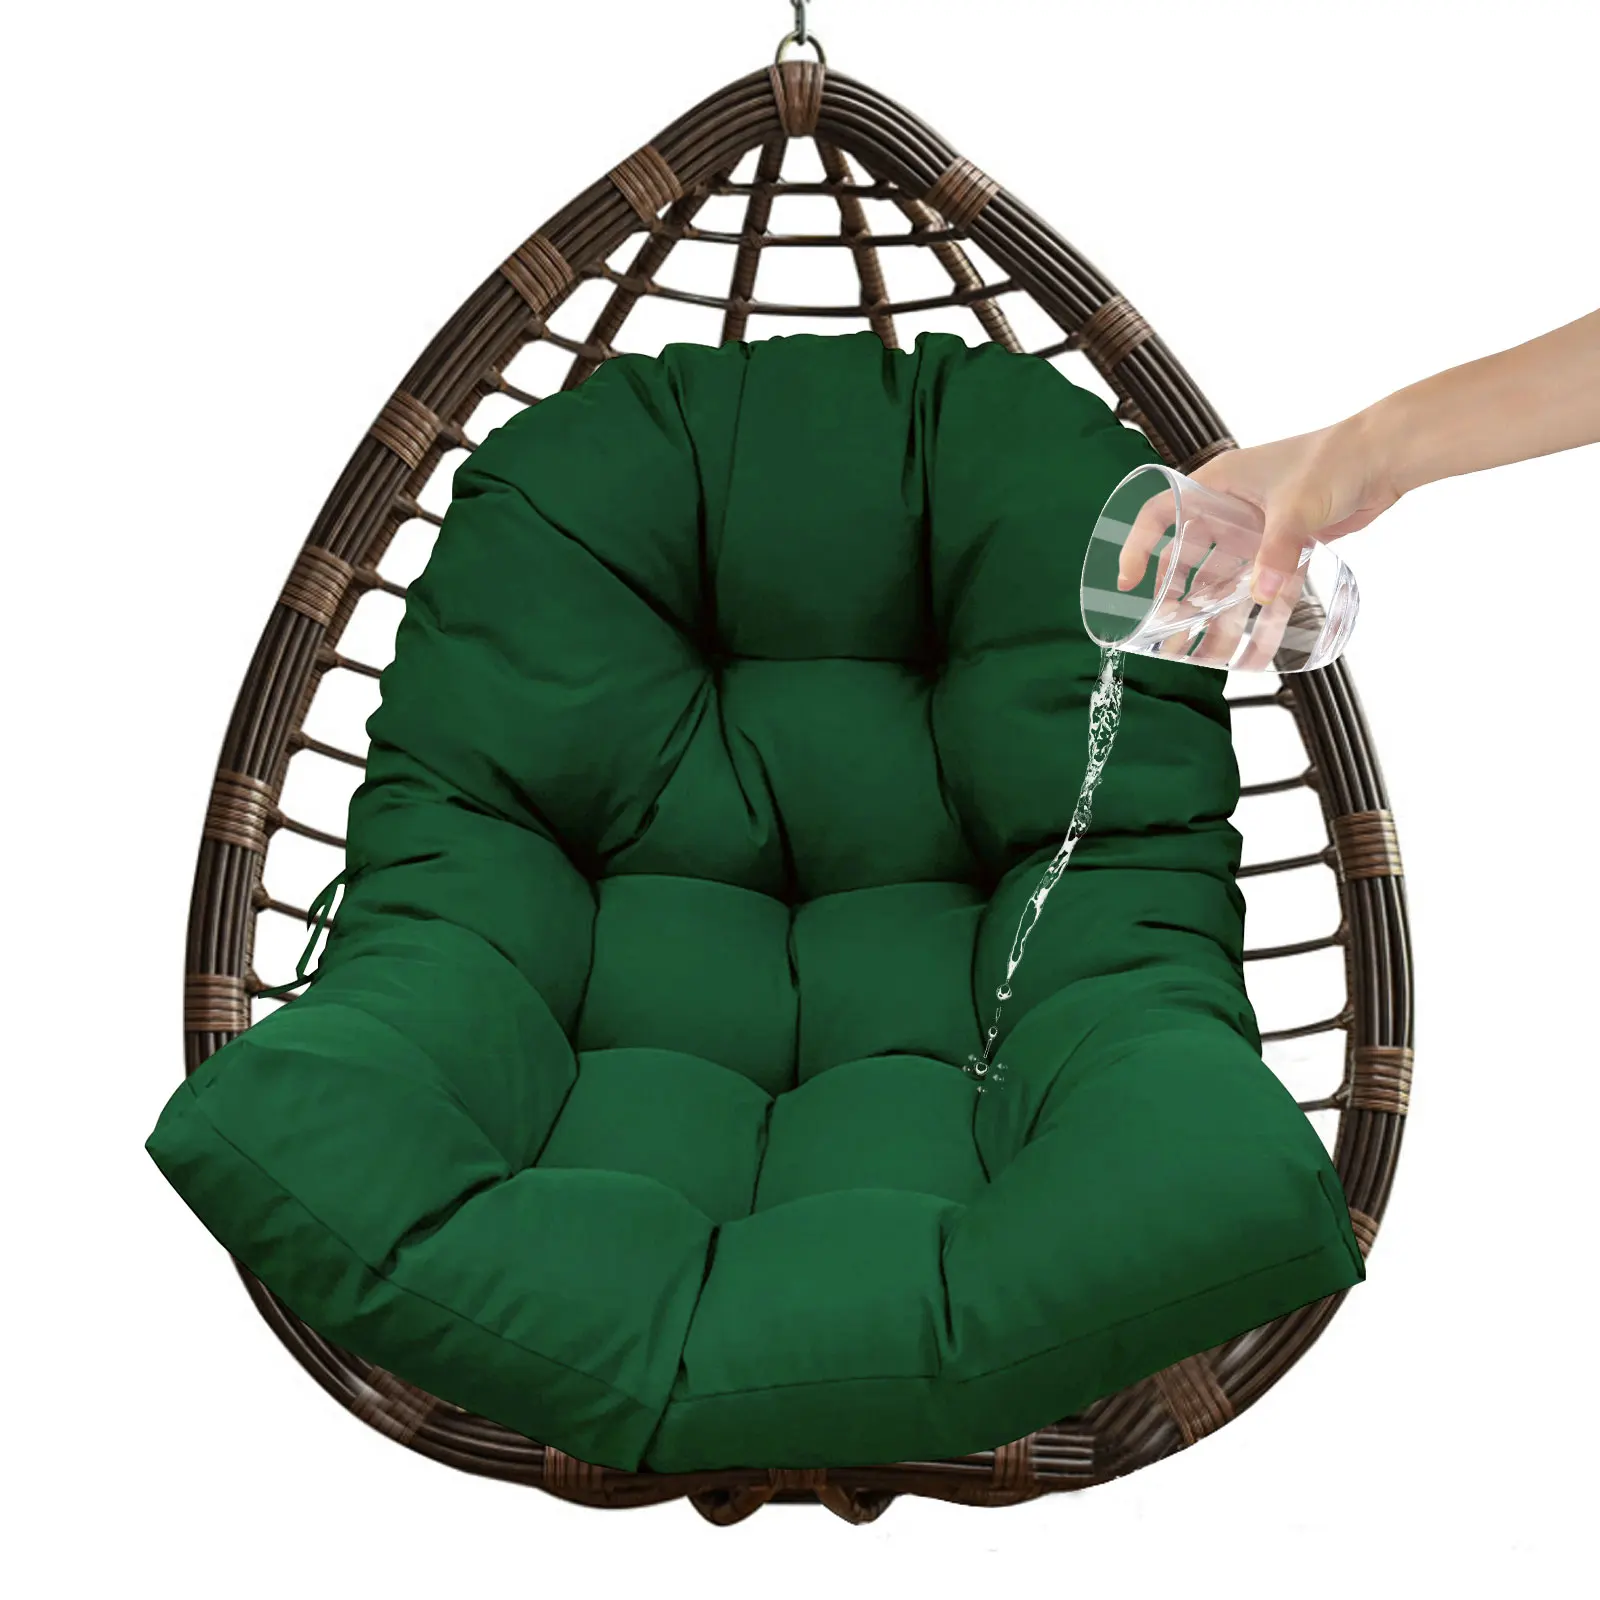 Waterproof Swing Hanging Basket Cushion Thickened Soft Egg Chair Pad Garden Indoor Outdoor Patio Seat Cushion for Rattan Chair